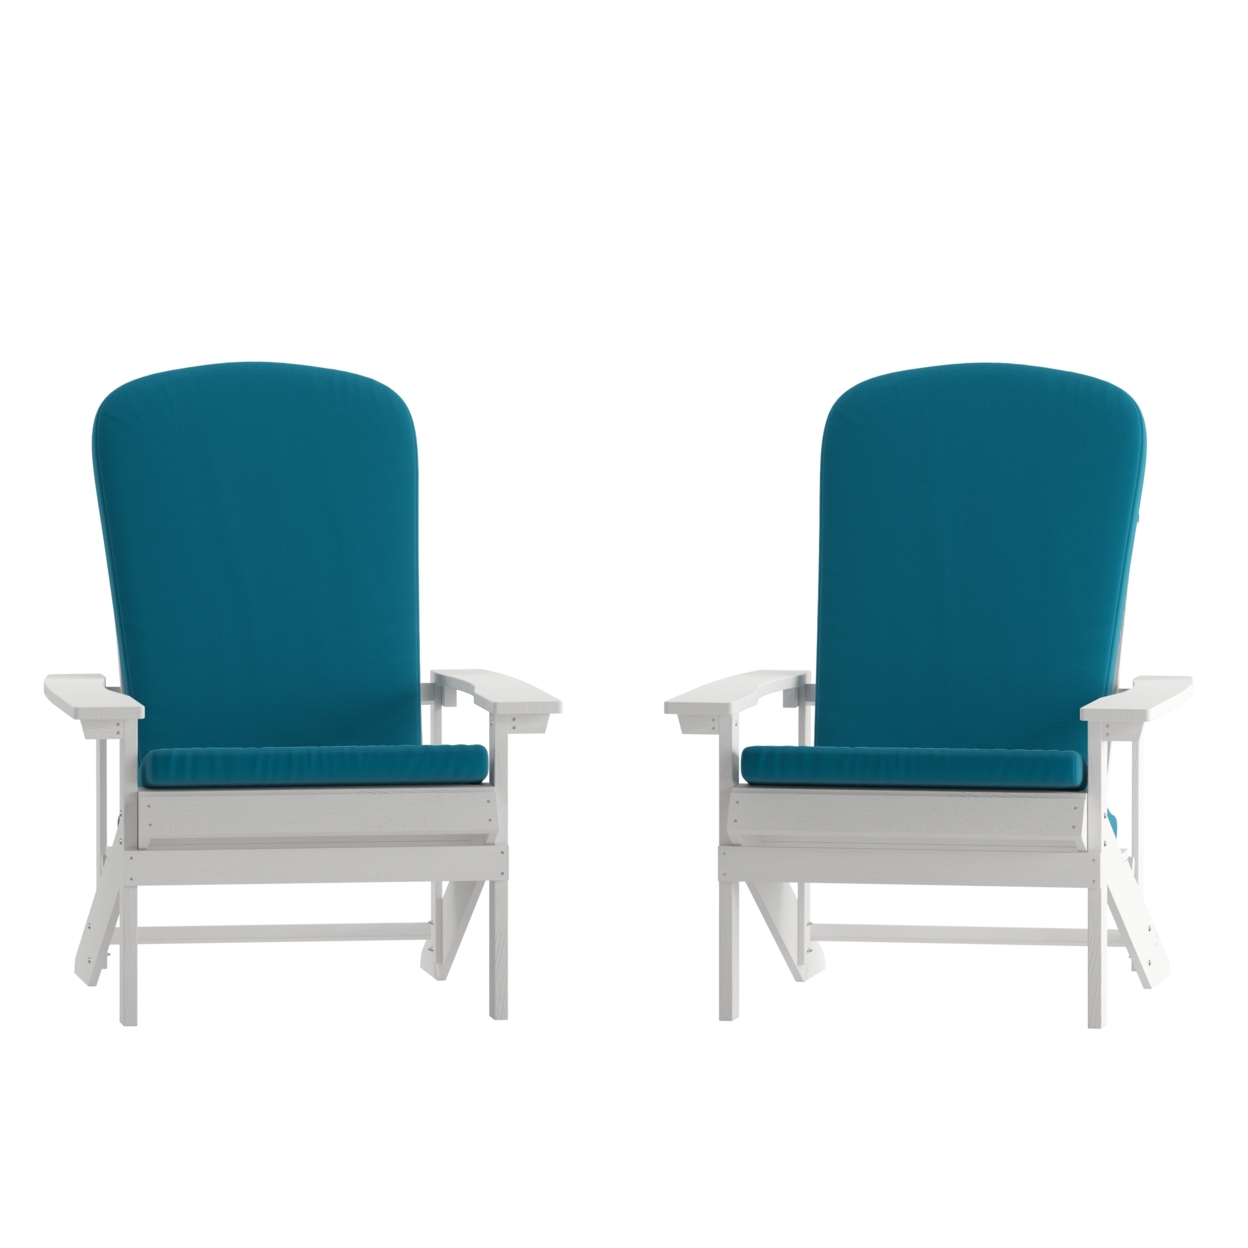 2 Piece Adirondack Chairs, White Polyresin, All Weather Teal Blue Cushions